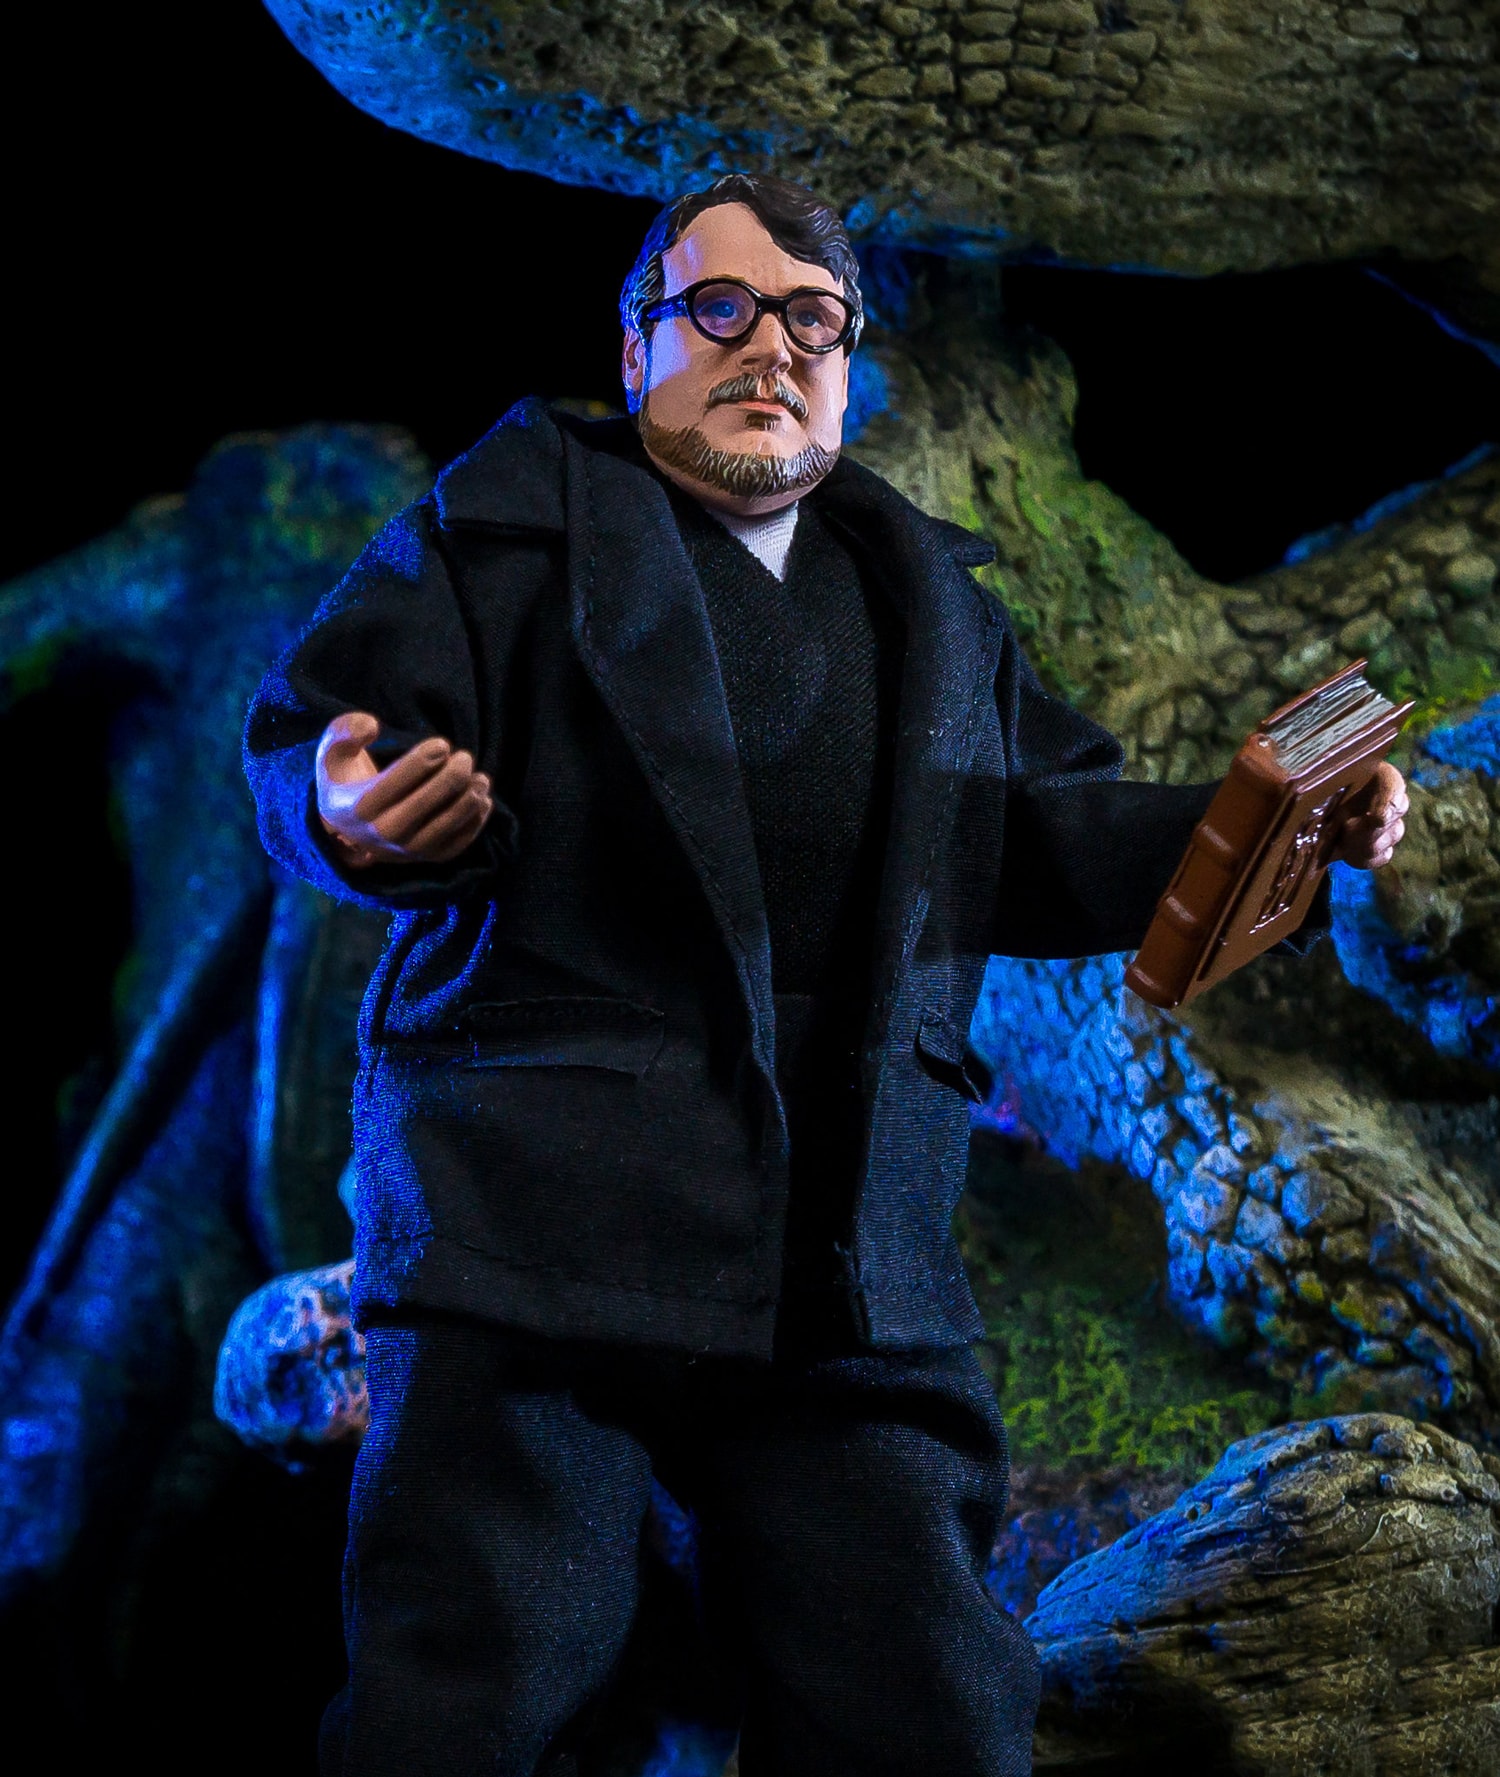 NECA Guillermo del Toro San Diego Comic Con Figure SDCC Toyark Movies Films Toys Figures Pan’s Labyrinth  Hellboy The Shape of Water Trollhunters The Strain Pacific Rim movies director